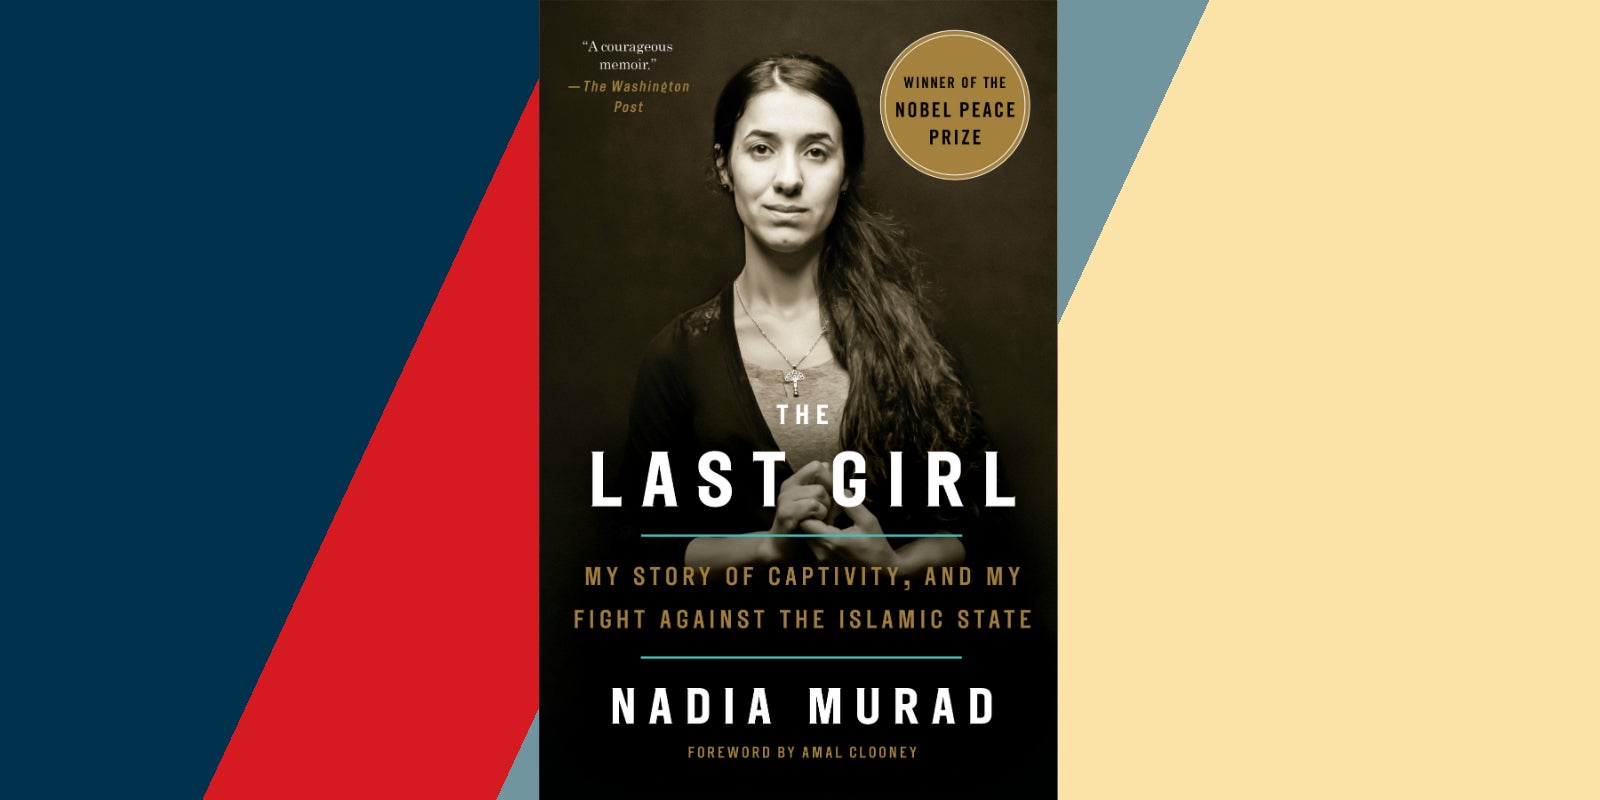 Nadia Murad, Author of THE LAST GIRL, Wins the Nobel Peace Prize